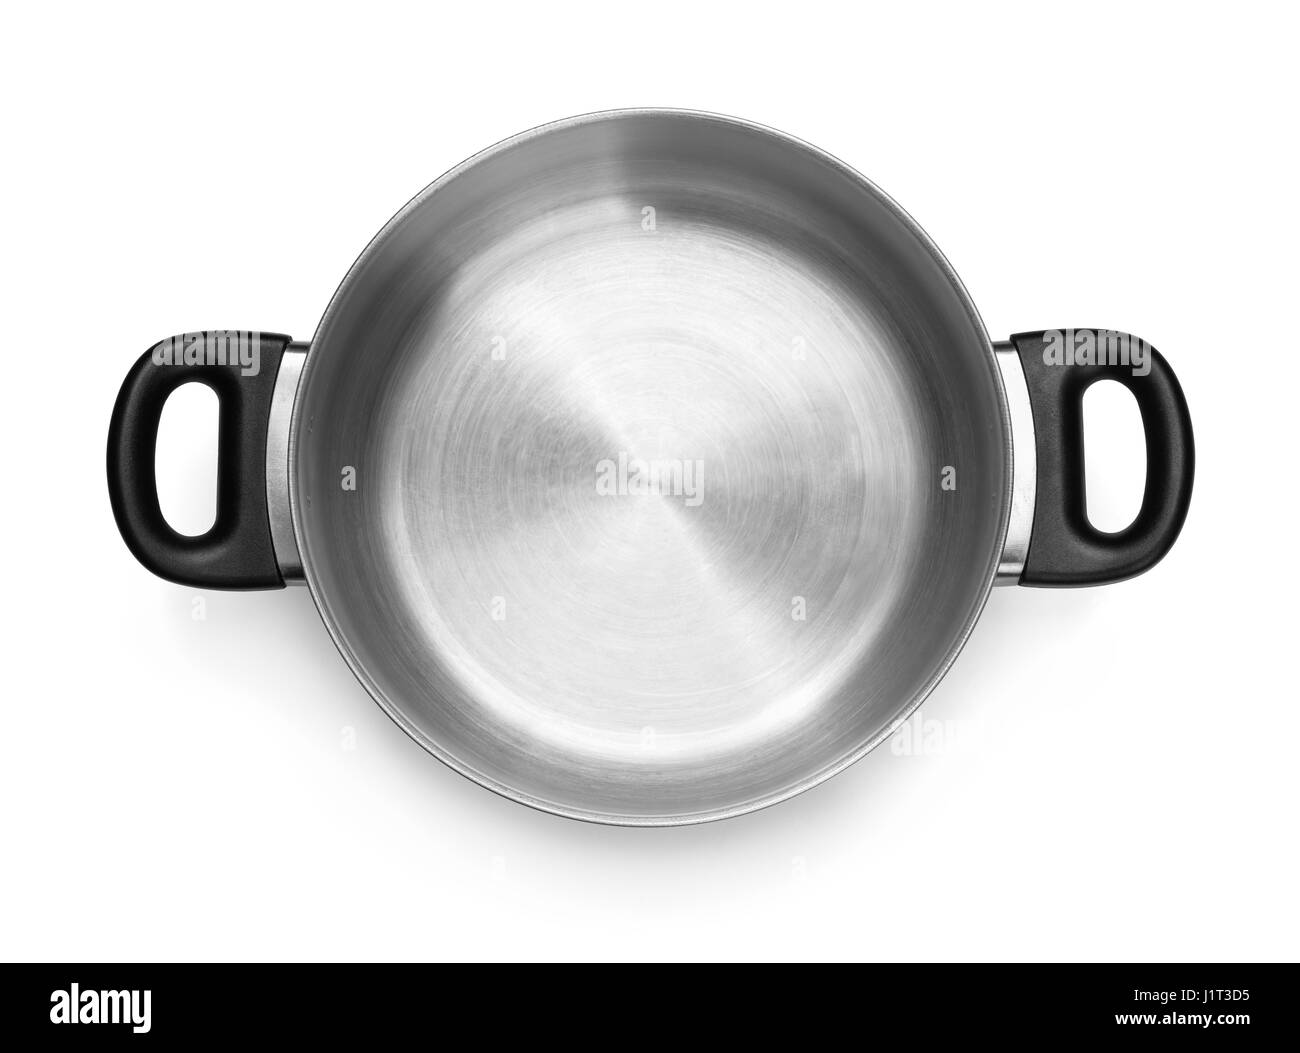 https://c8.alamy.com/comp/J1T3D5/top-view-of-empty-steel-cooking-pot-isolated-on-white-J1T3D5.jpg